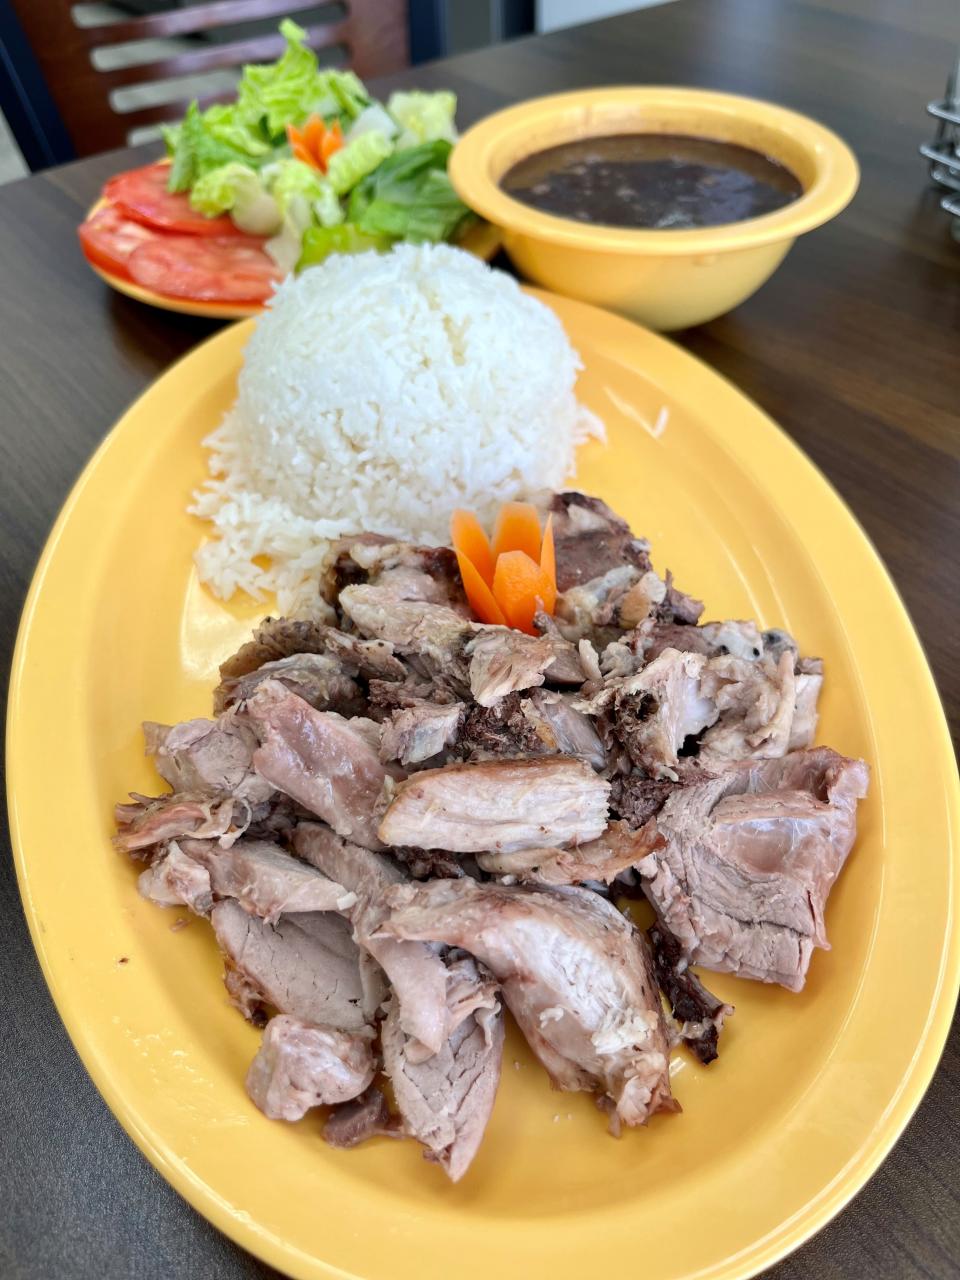 The roast pork special is a best-seller at J&J Paradise Bakery in Cape Coral.